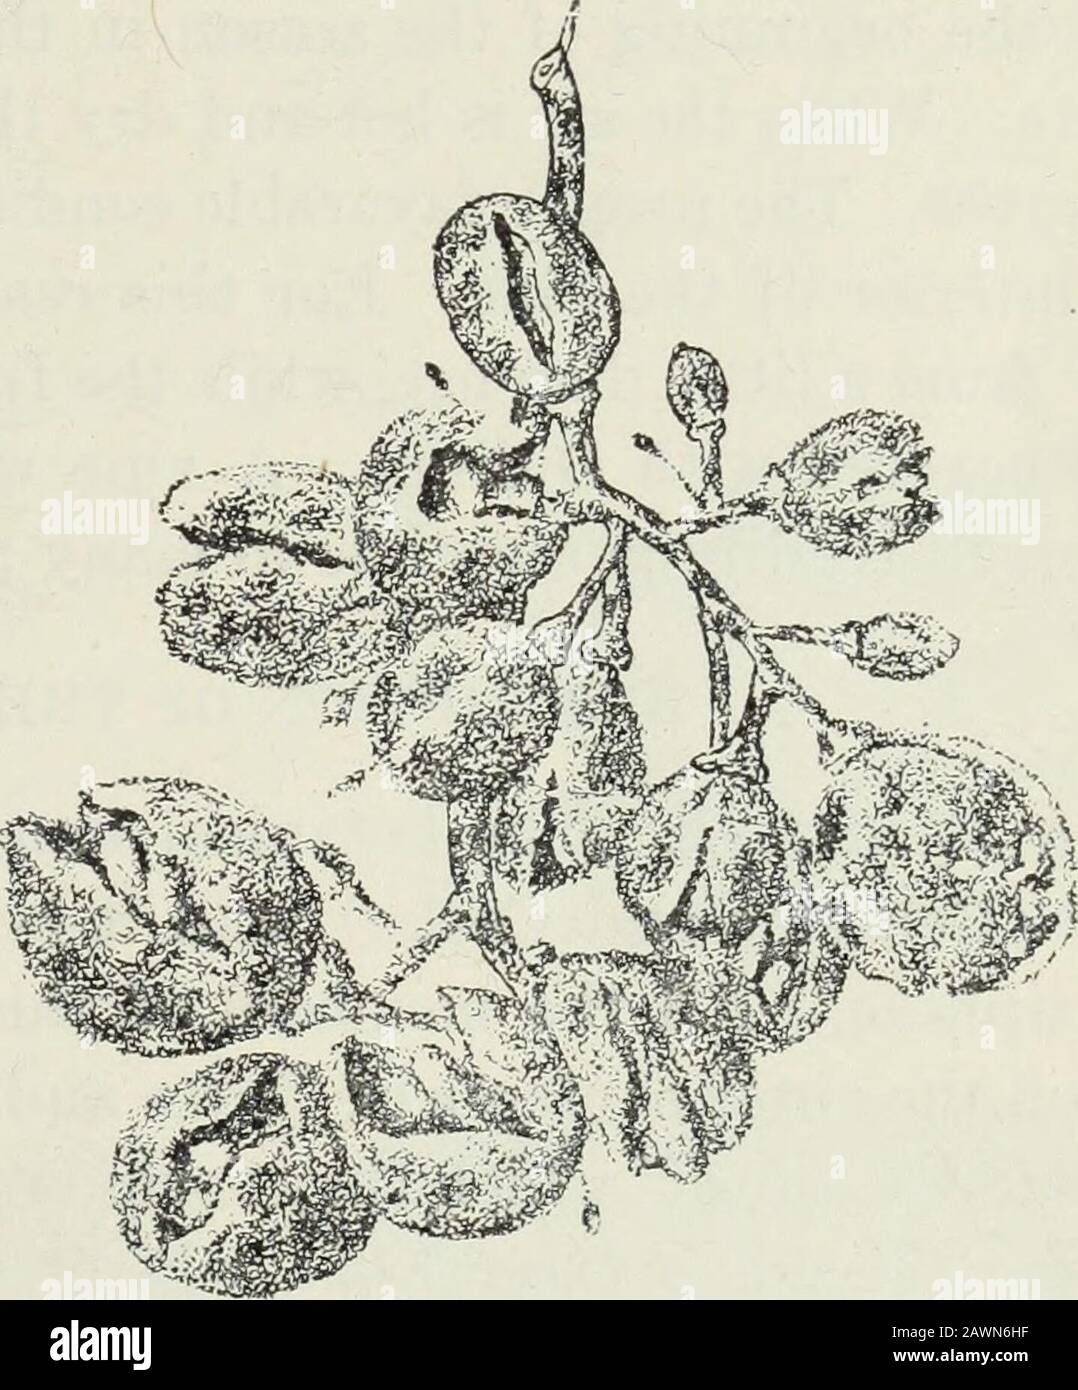 Oidium or powdery mildew of the vine . Fig. 4. Berries badly affected and cracked. (After Foex.) If this cracking occurs early, the grapes dry up completely beforeripening. If later, they may develop sugar and can be used for winemaking, but the crop is diminished in volume. In moist seasons theberries which are cracked usually become the prey of blue mould andare completely destroyed. After the grapes have lost the green color due to the presence ofchlorophyll in the skin and have commenced to ripen they are not at-tacked by Oidium. The markings and blotches which are often seenon ripe grapes Stock Photo